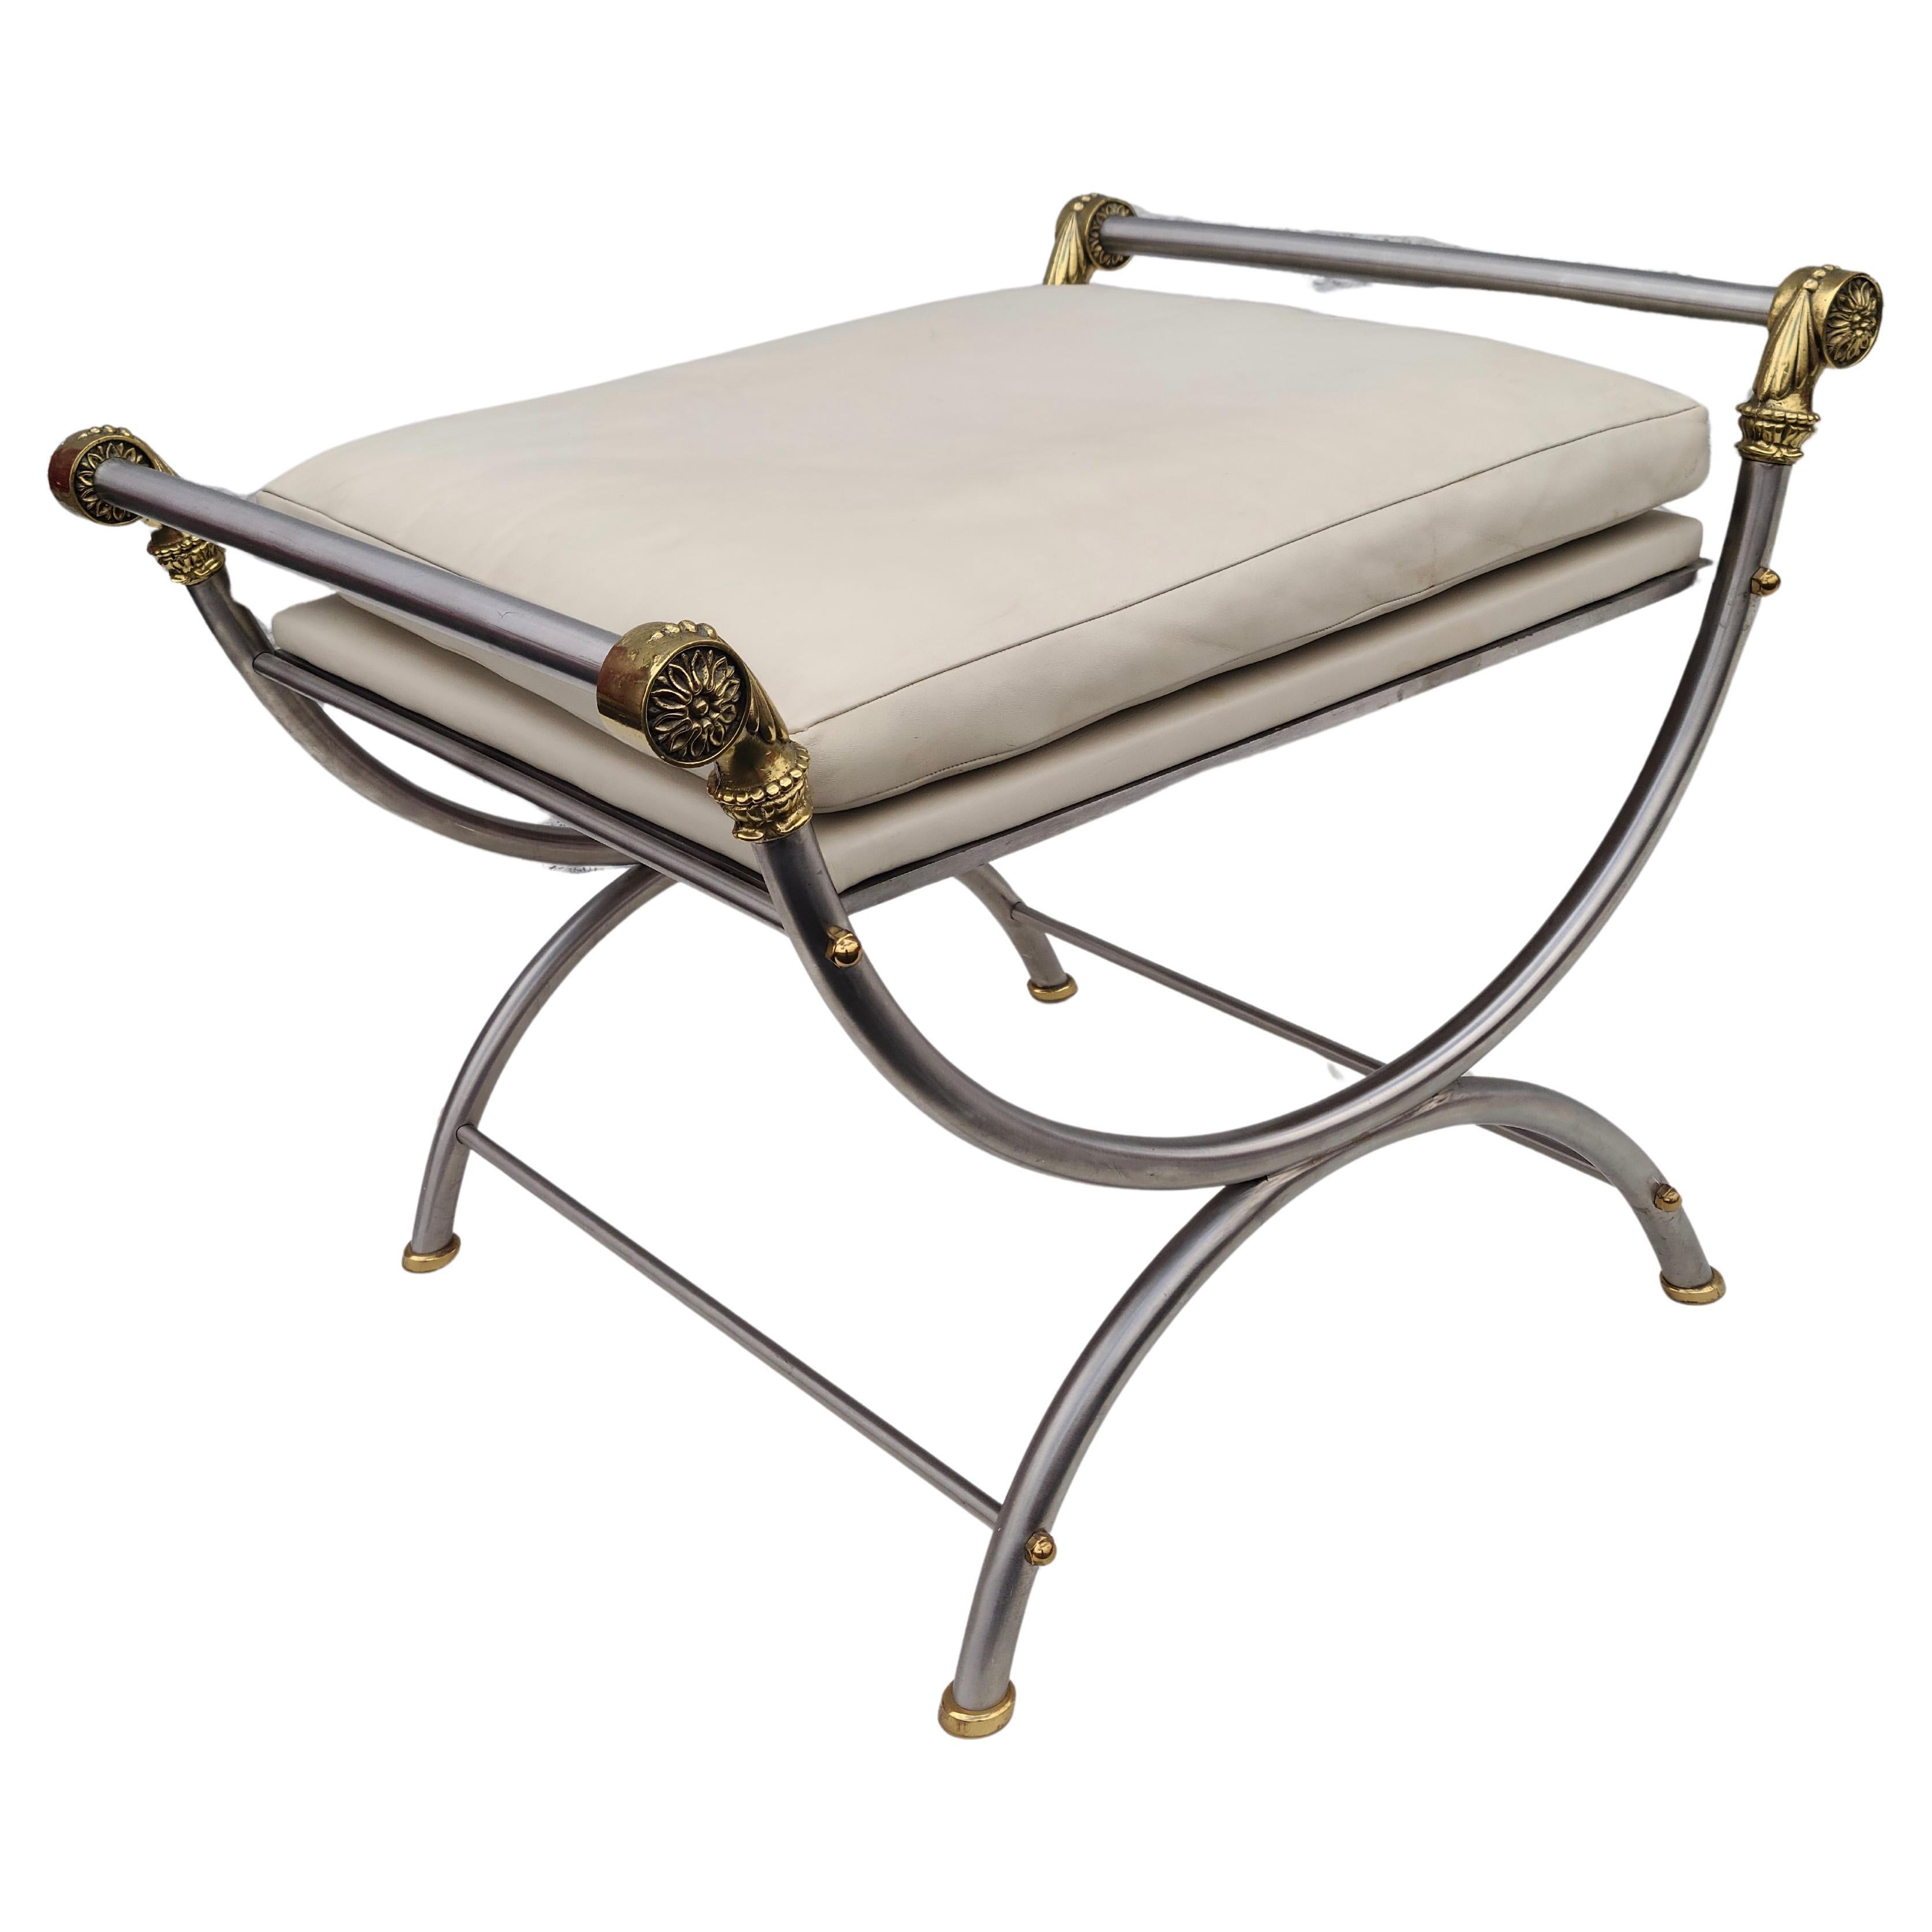 Campaign Bench attributed to Maison Jansen.
Leather seat, stainless steel frame, brass trim.